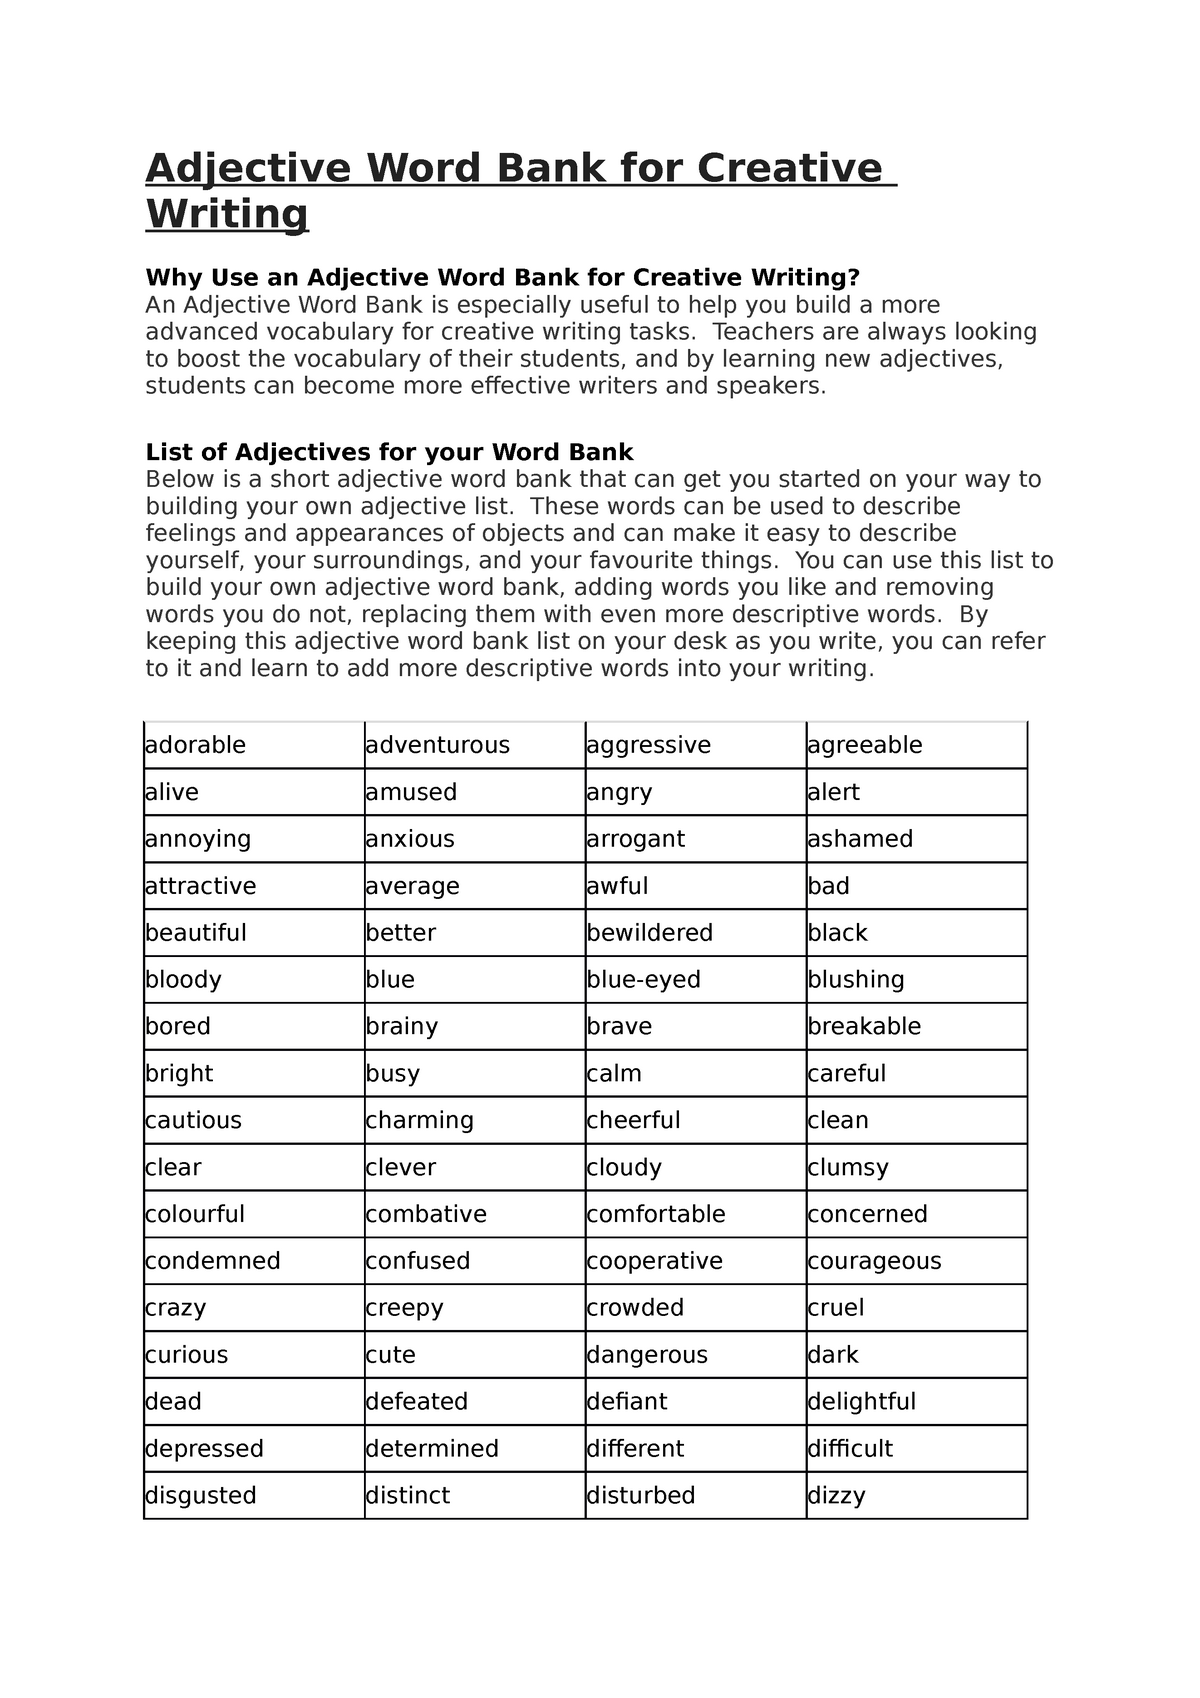 Adjective Word Bank For Creative Writing Teachers Are Always Looking To Boost The Vocabulary 